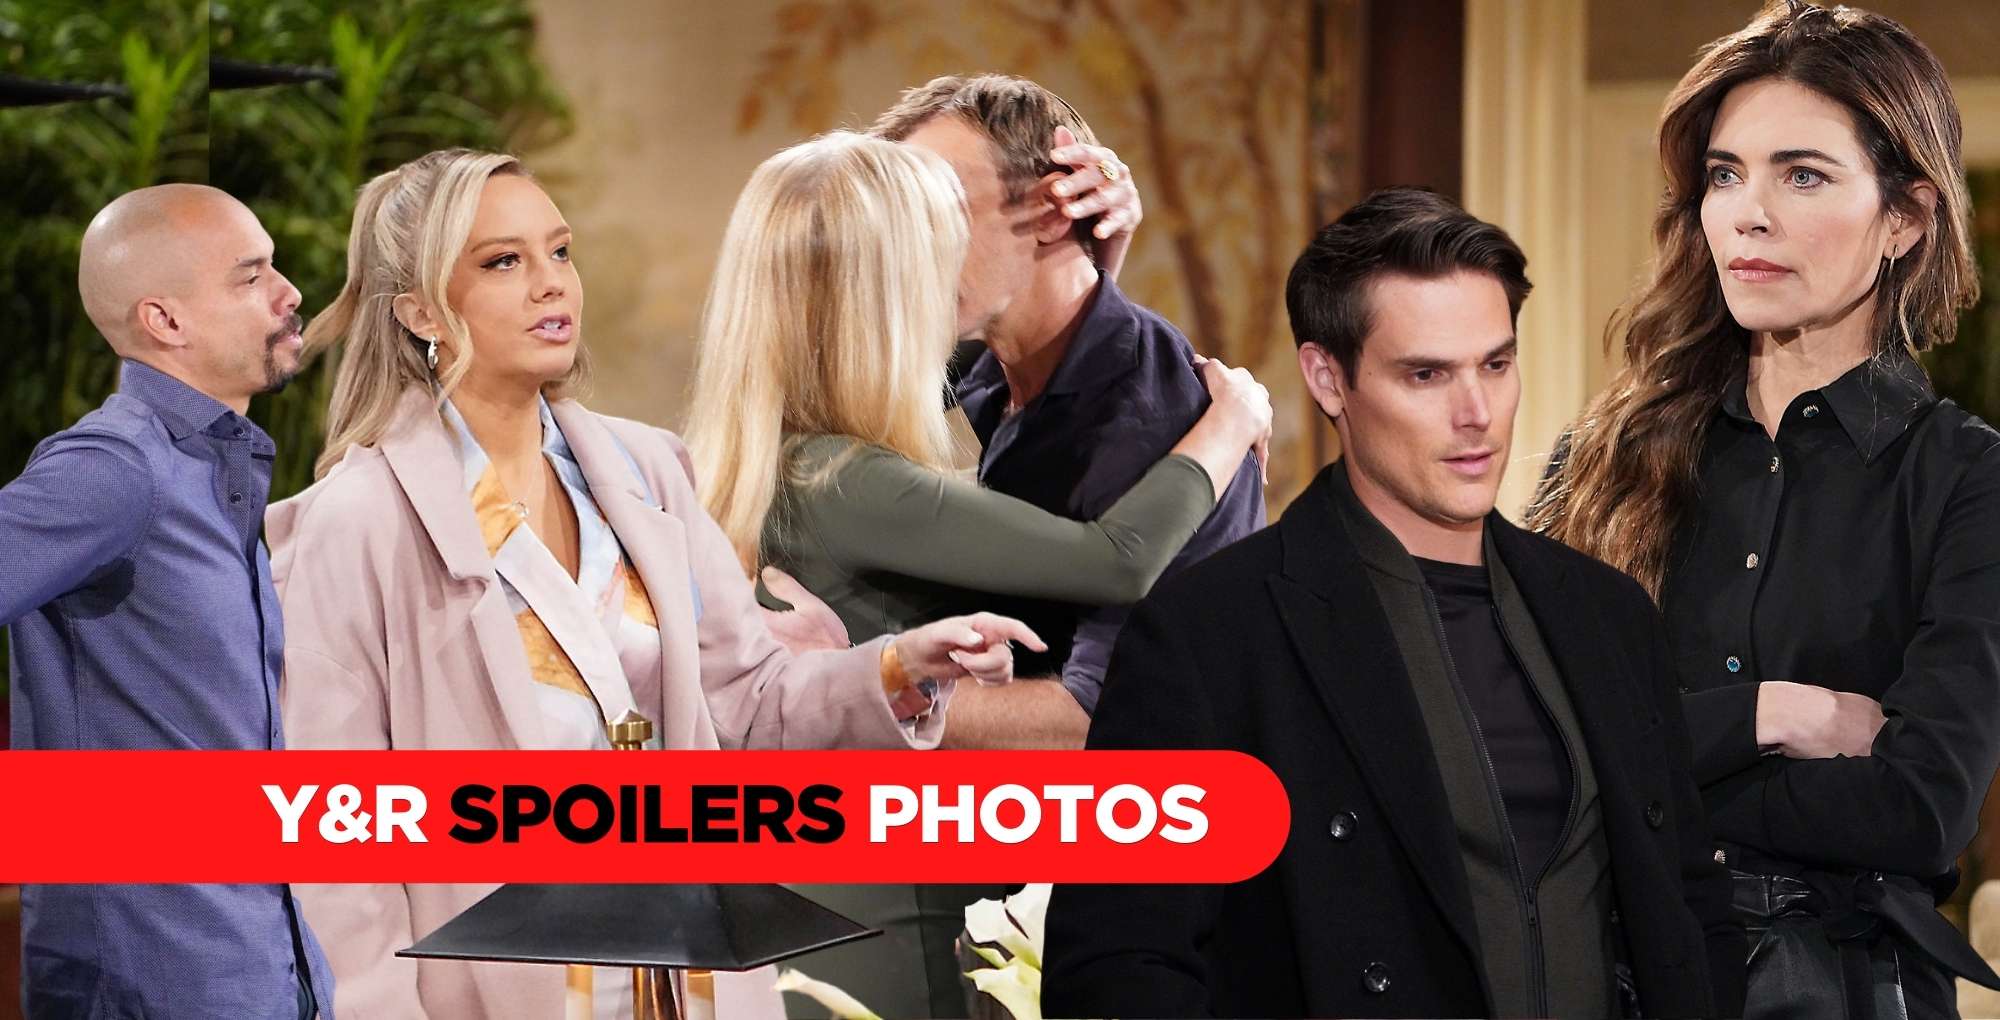 y&r spoilers photos for wednesday, march 8.